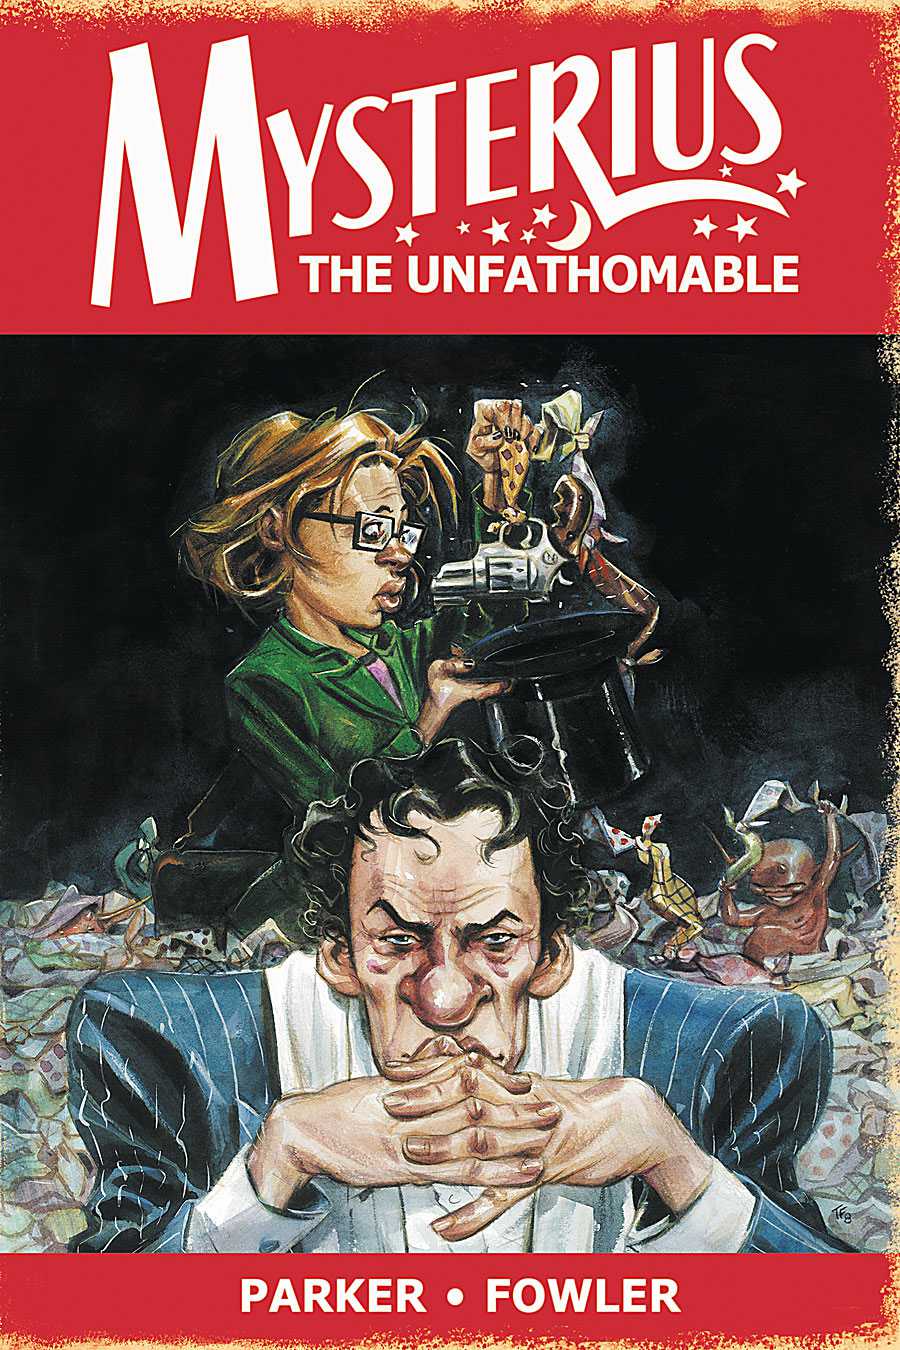 Read more about the article Notes On A Comic Book: Mysterius The Unfathomable